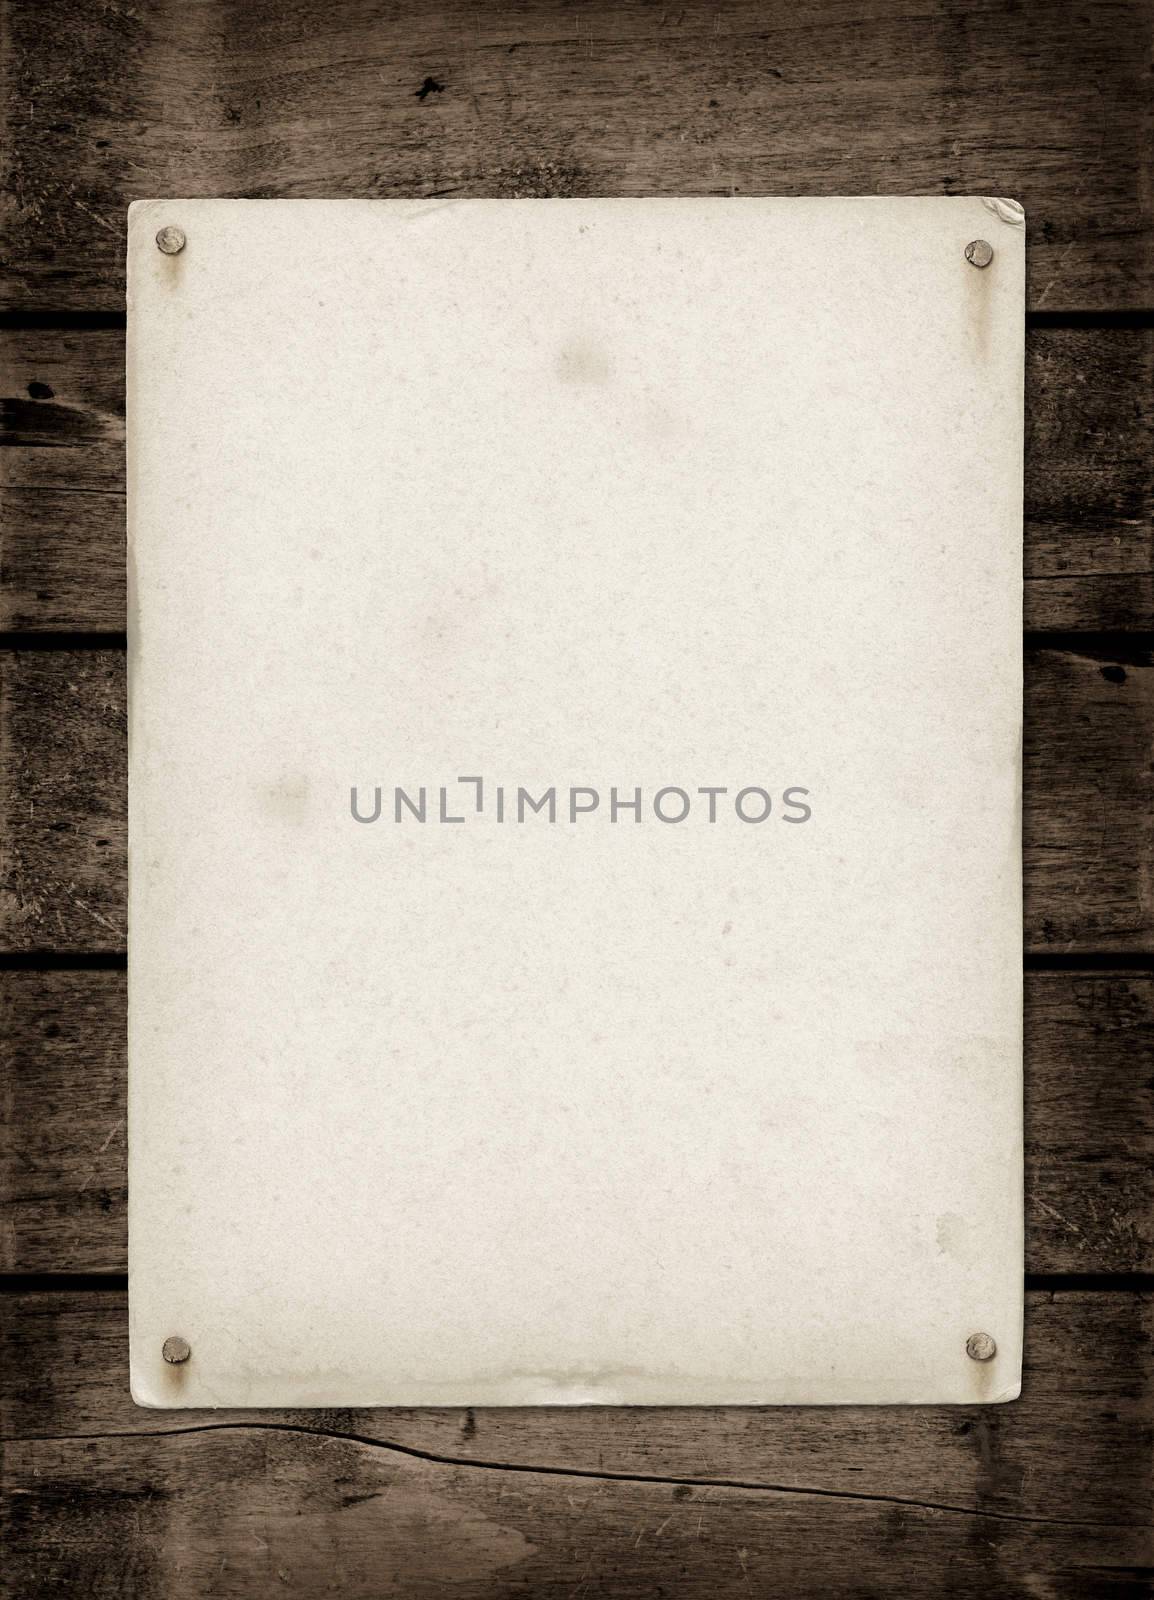 Old textured paper sheet on a dark wood table. horizontal Mockup